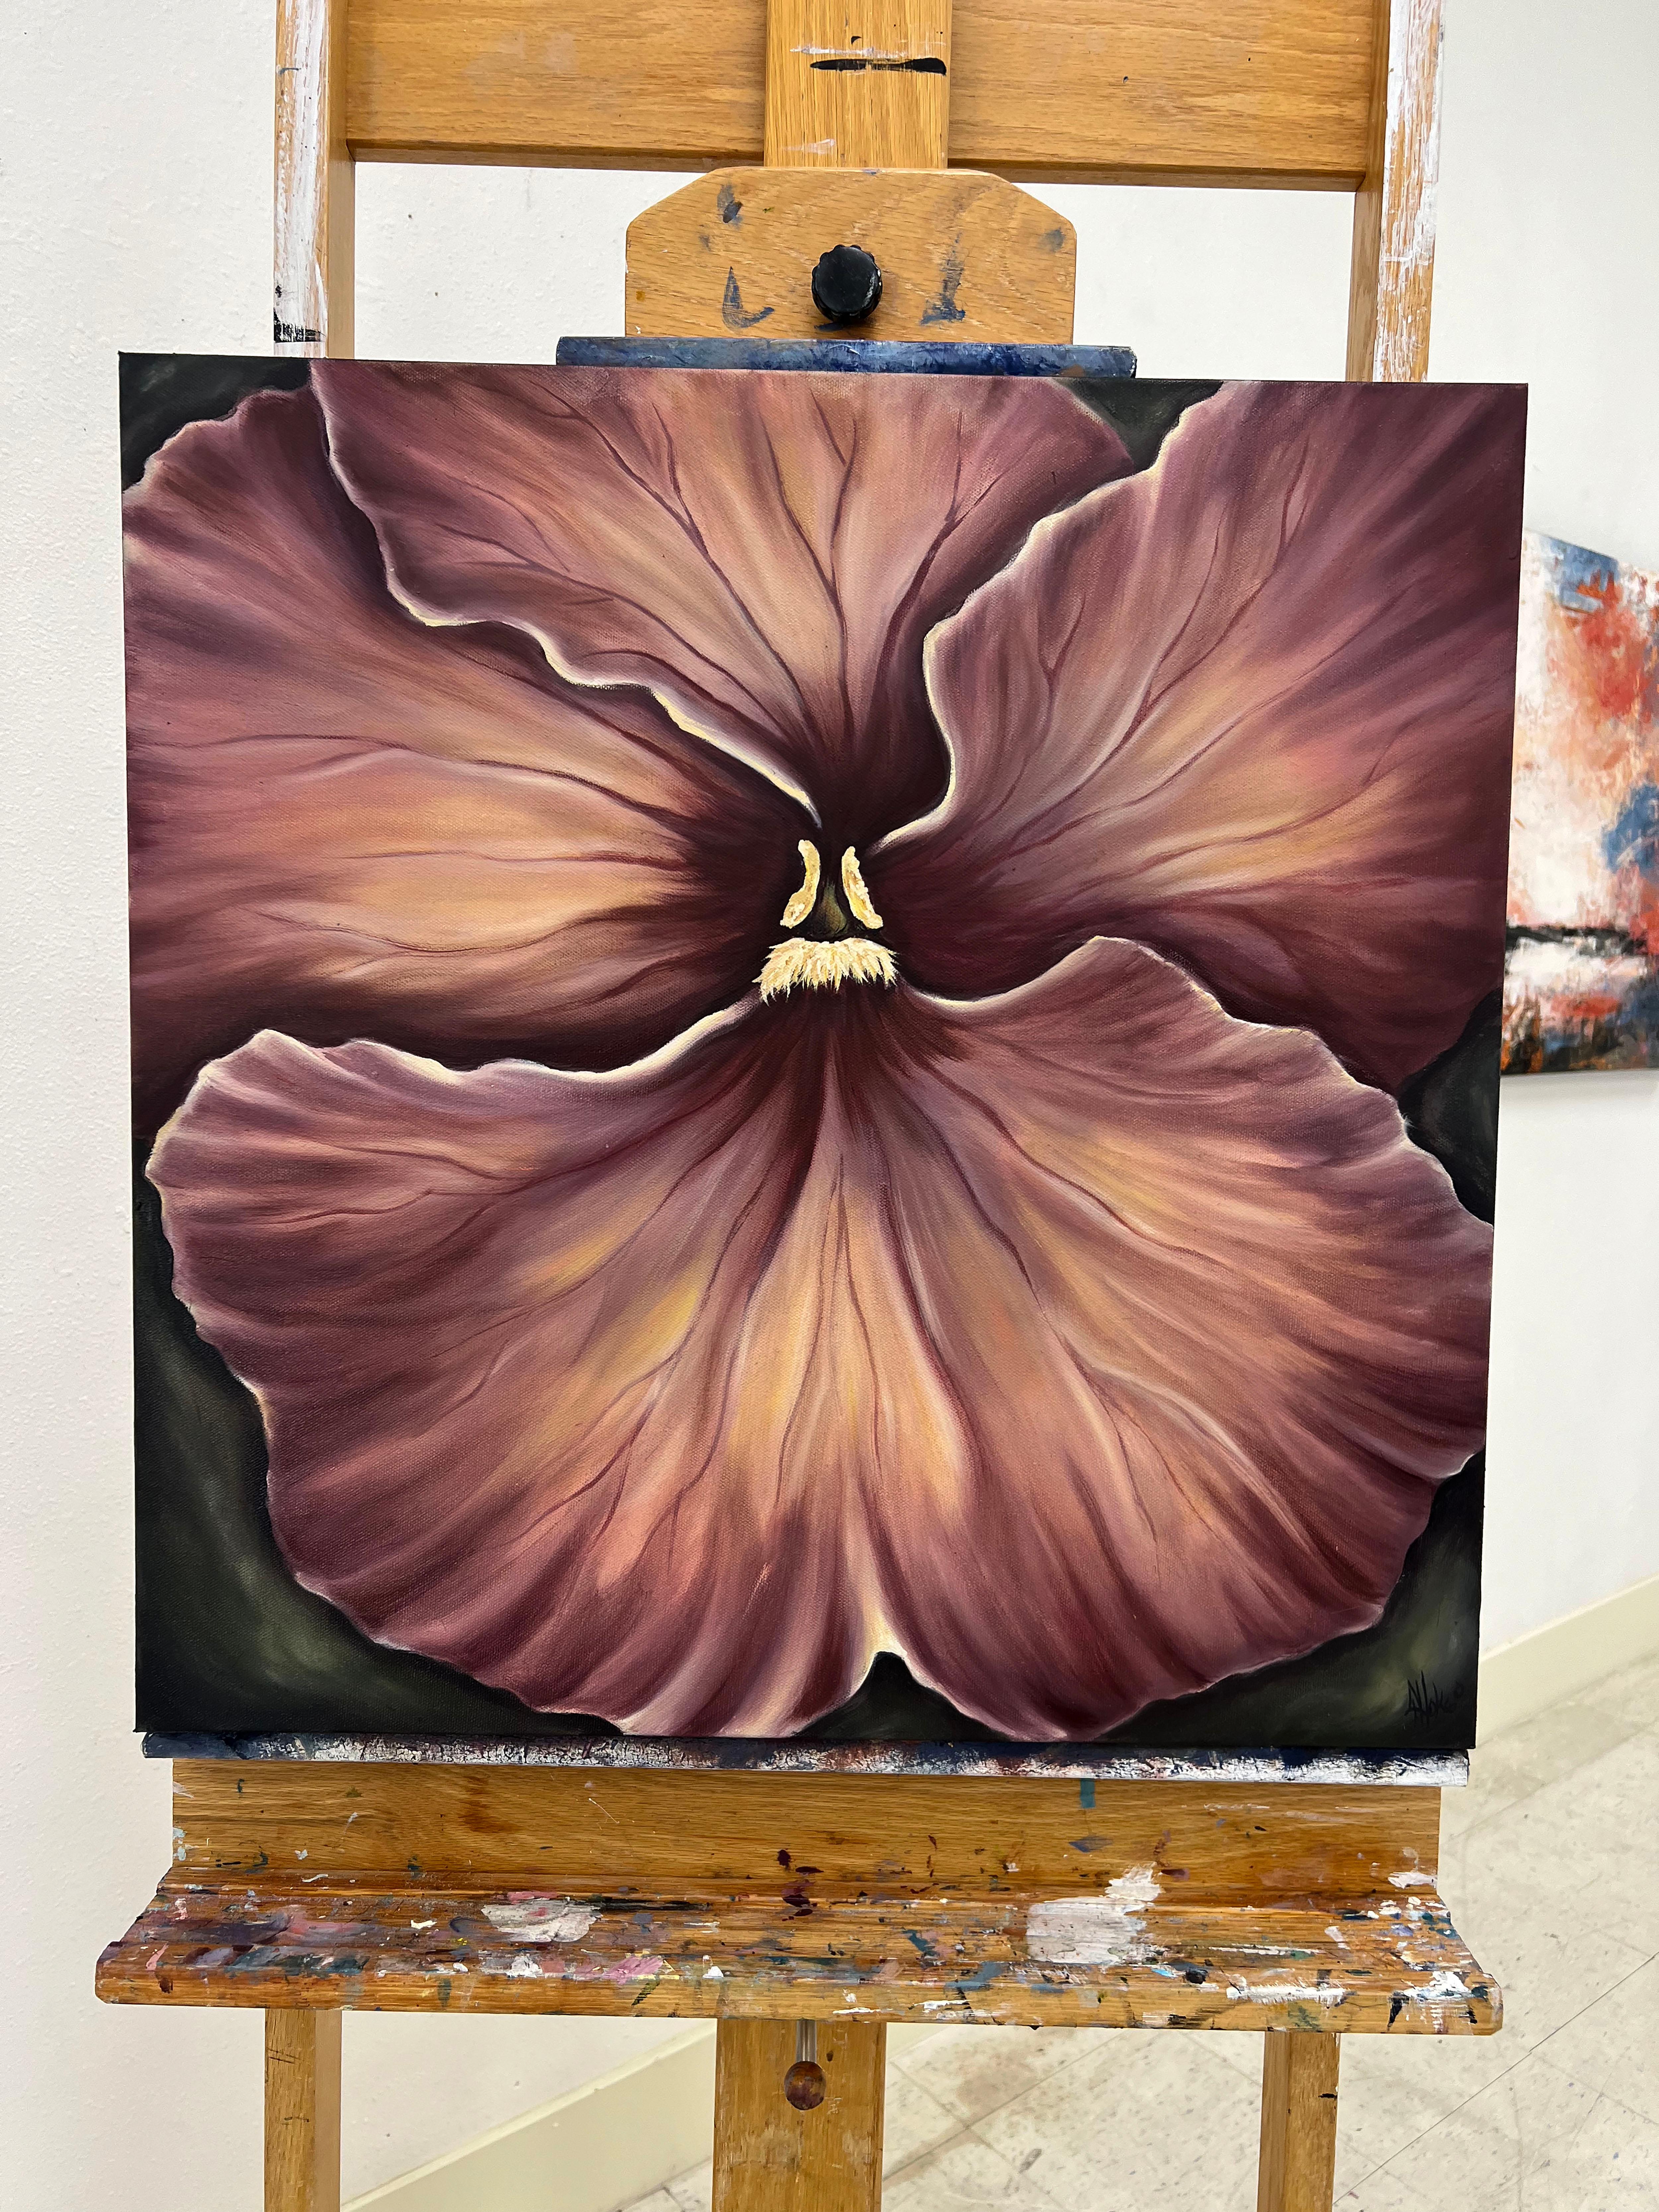 <p>Artist Comments<br>A pansy opens up, luring the viewer's gaze towards its center. Against the dark background, the deep mauve tones of the flower stand out, highlighting its delicate markings and curves. Artist Pamela Hoke paints the same subject